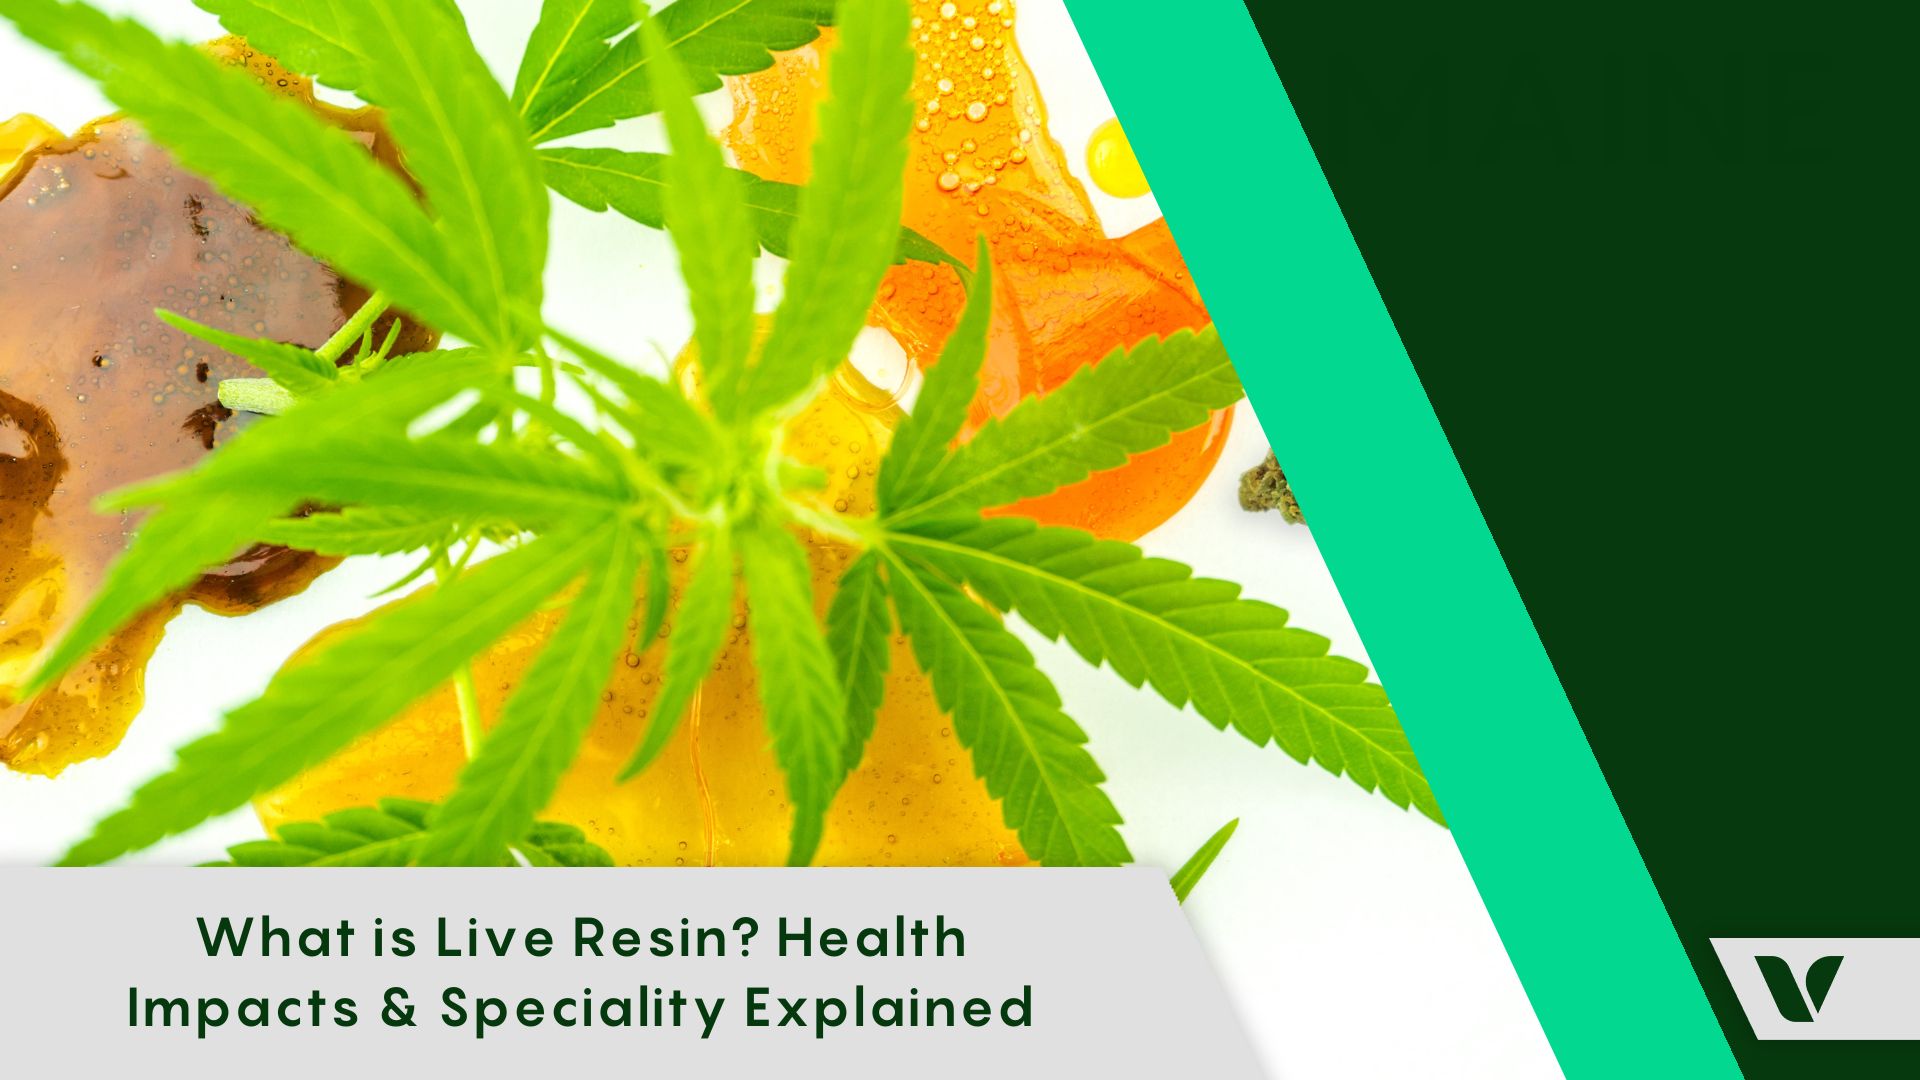 What is Live Resin? Health Impacts & Speciality Explained